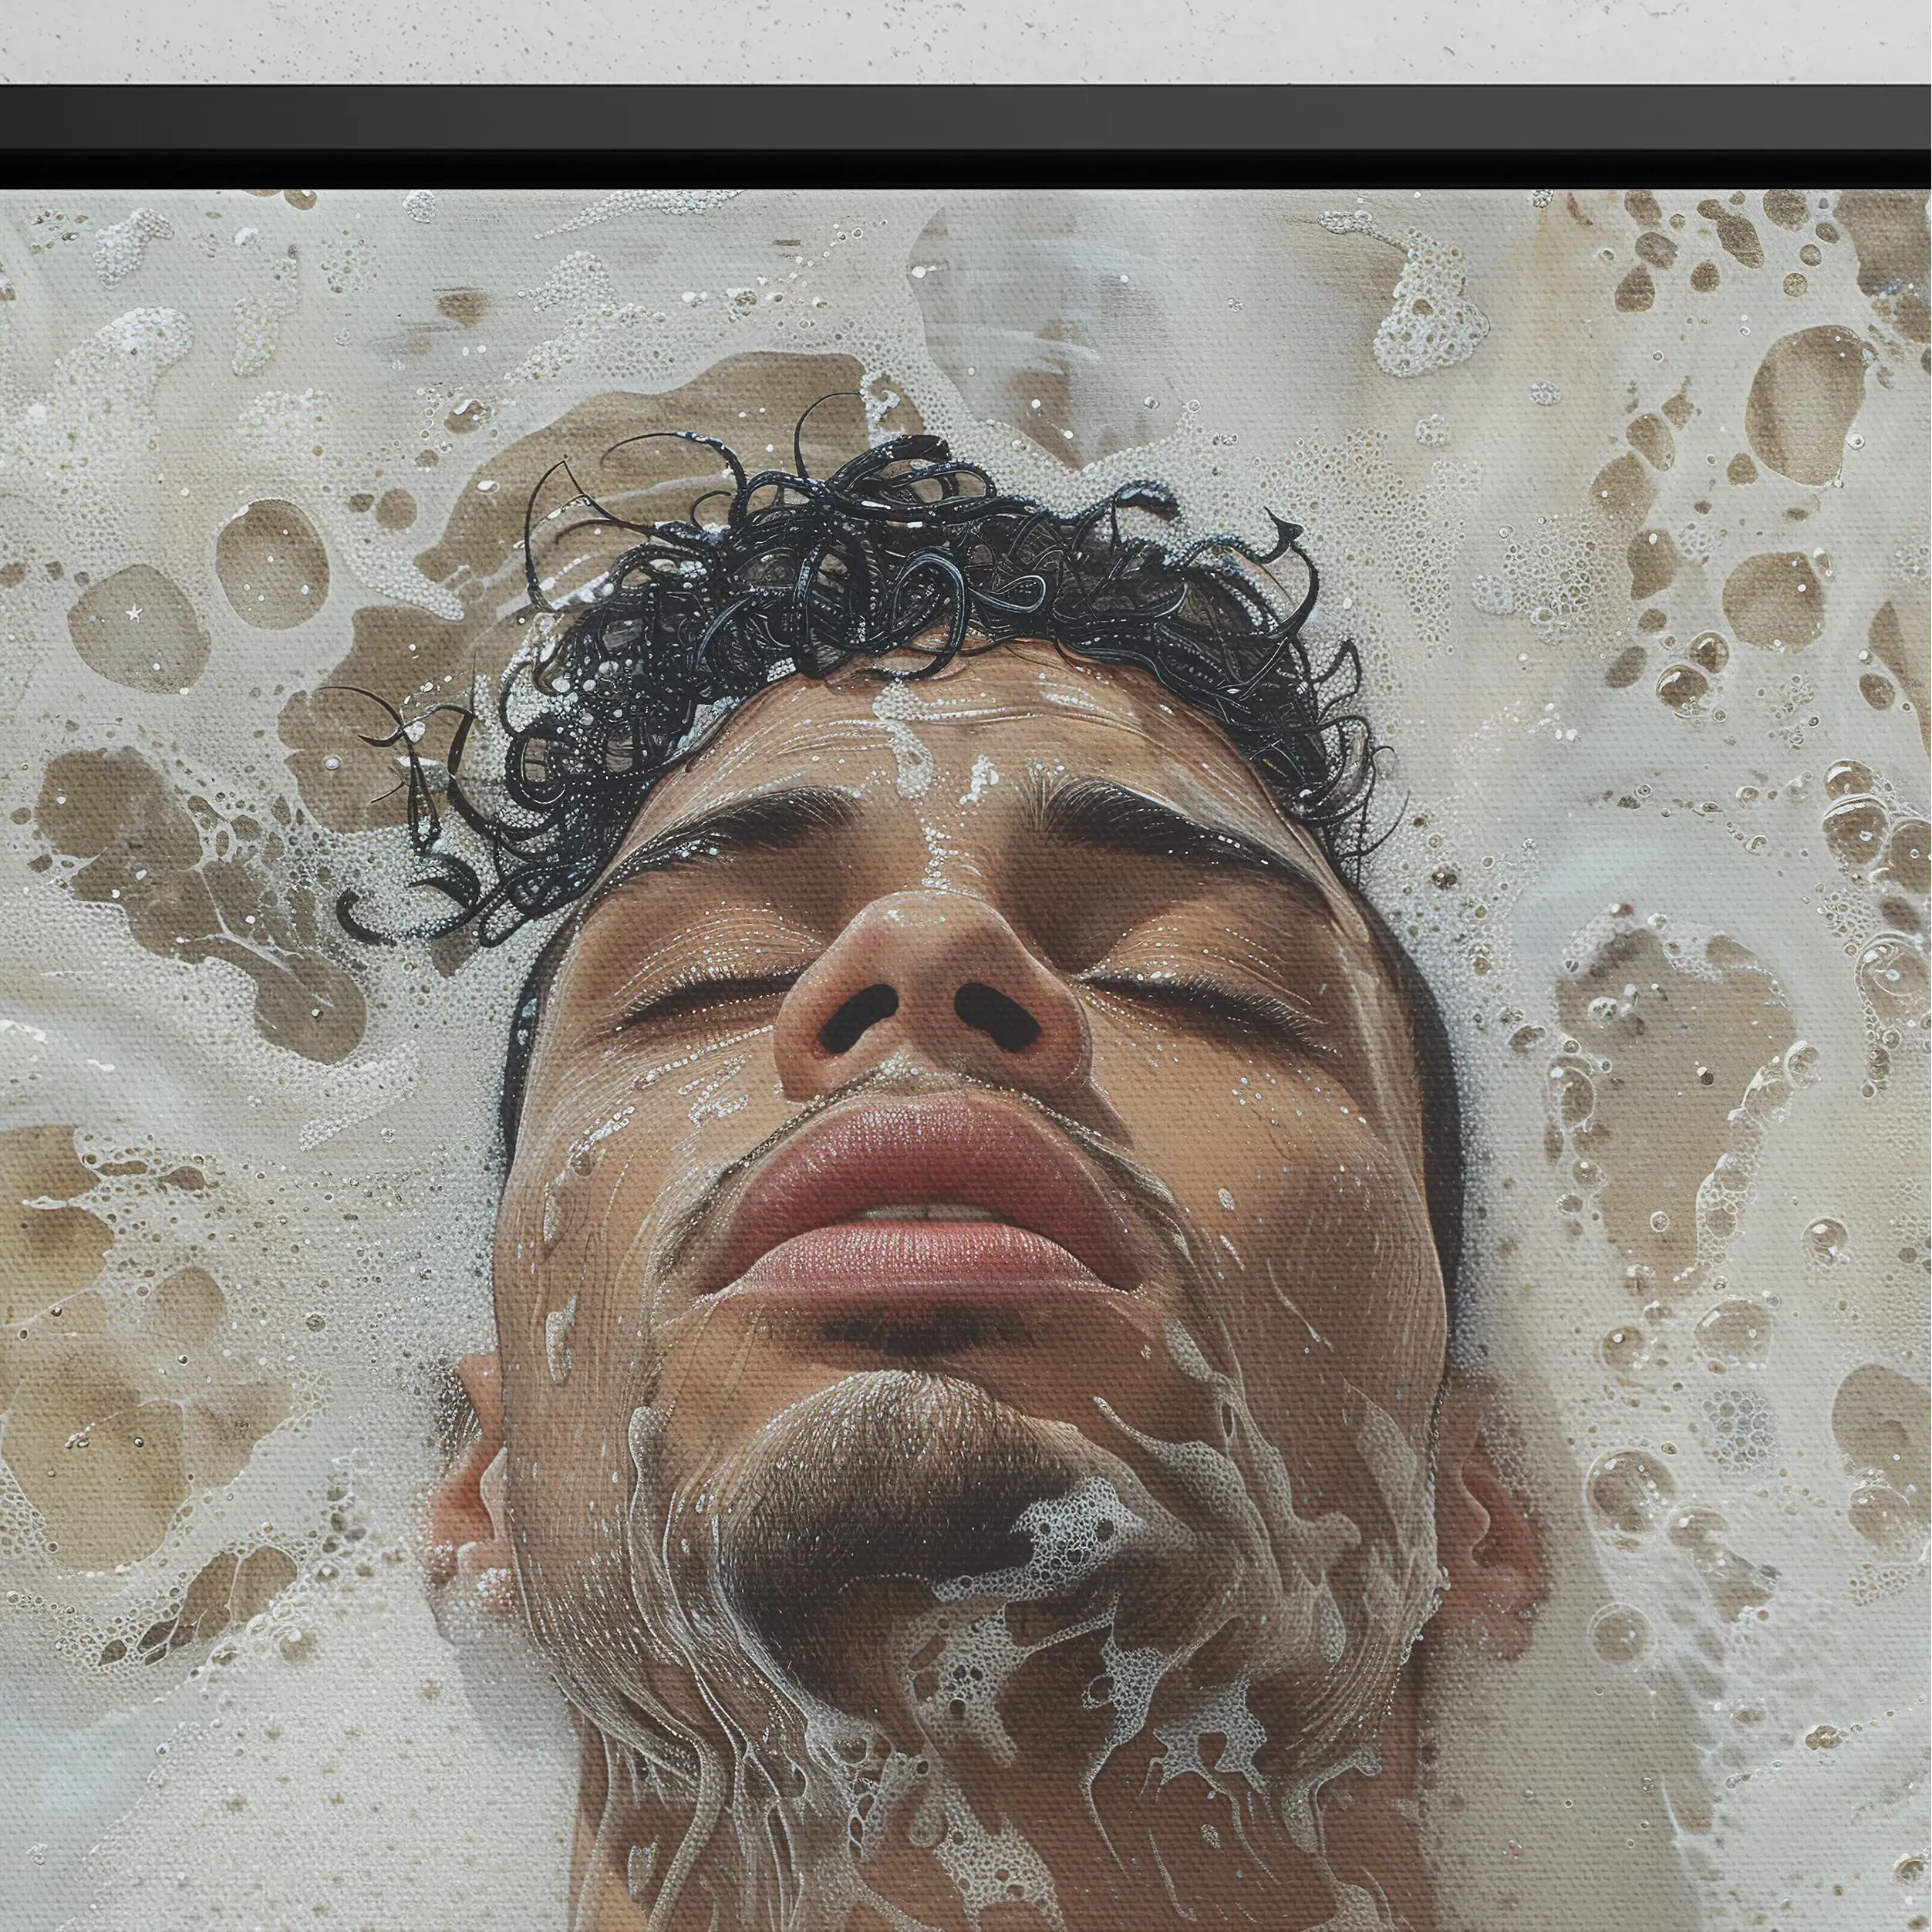 Squeaky Clean - Afrolatino Homoerotic Float Frame Canvas - Posters Prints & Visual Artwork - Aesthetic Art